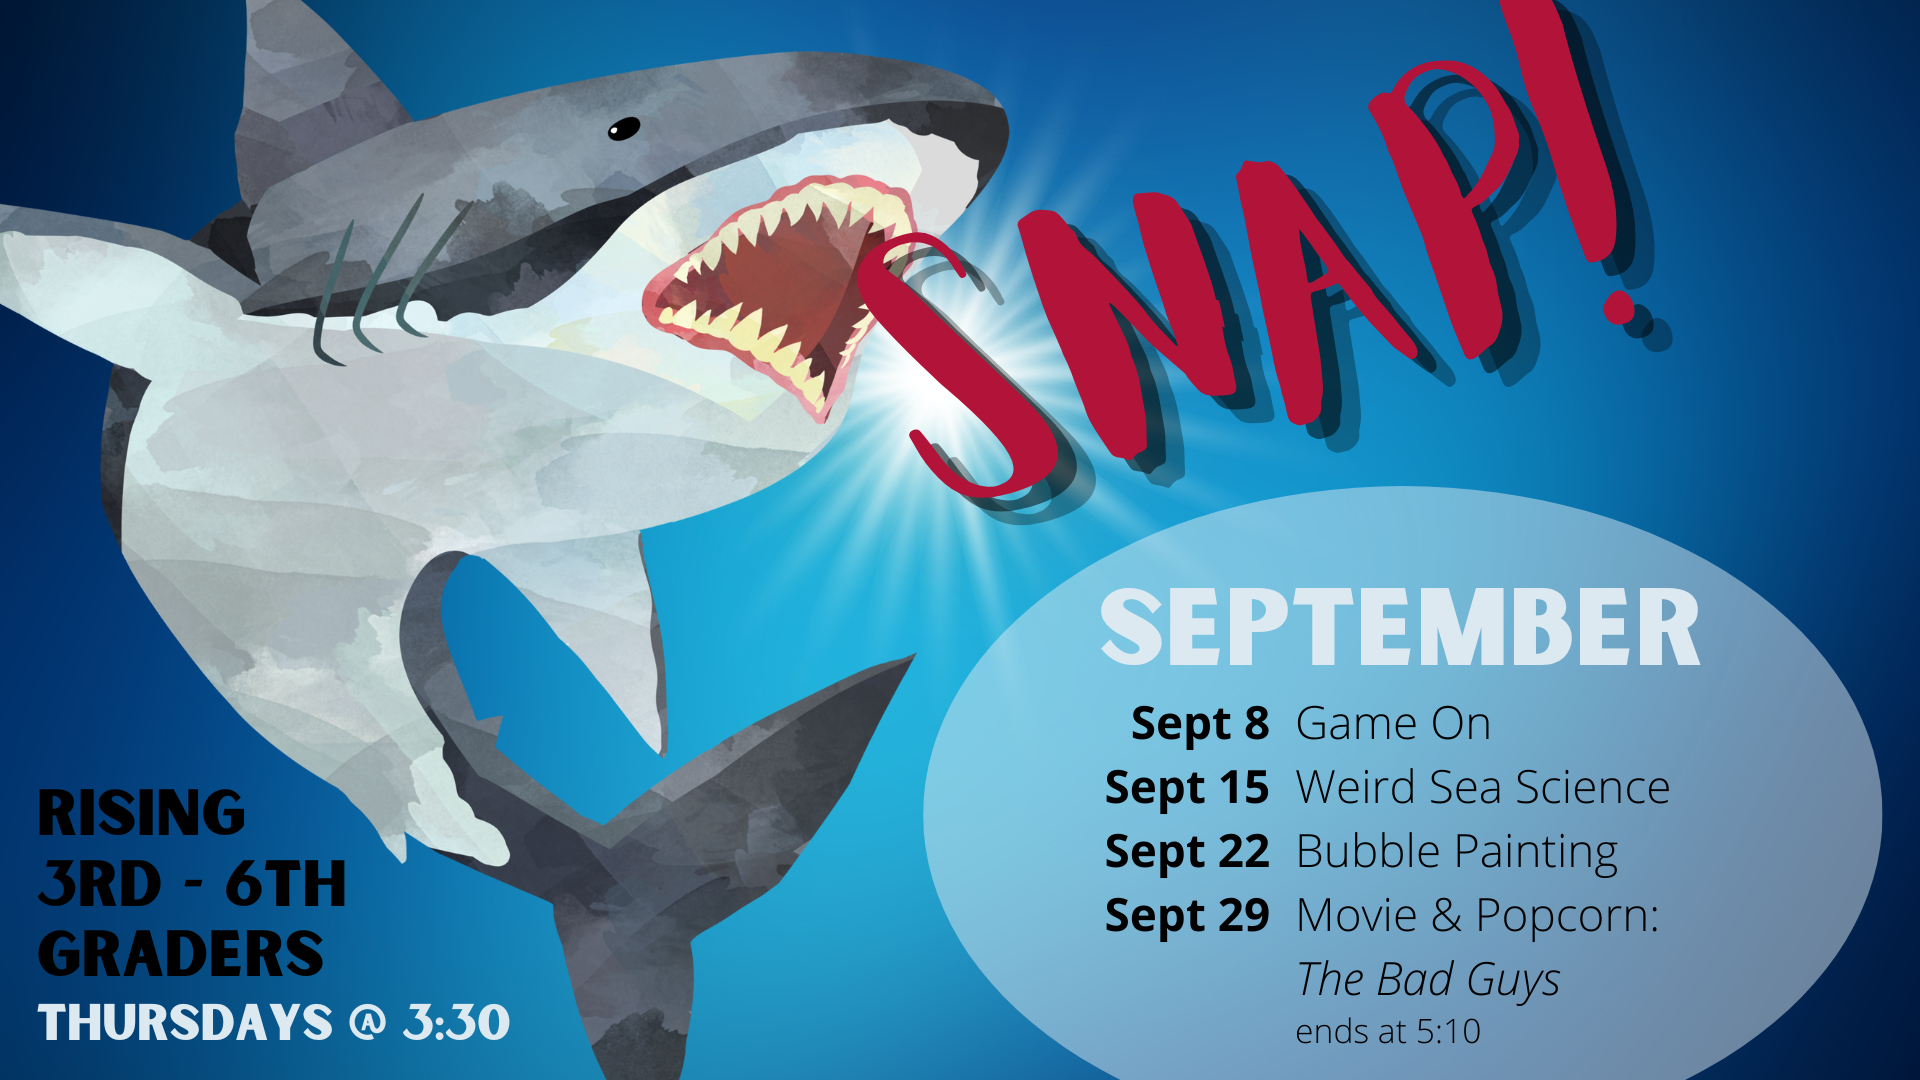 Sept. 8 - Game On Sept. 15 -Weird Sea Science Sept. 22 - Bubble Painting Sept. 29 - Movie & Popcorn: The Bad Guys